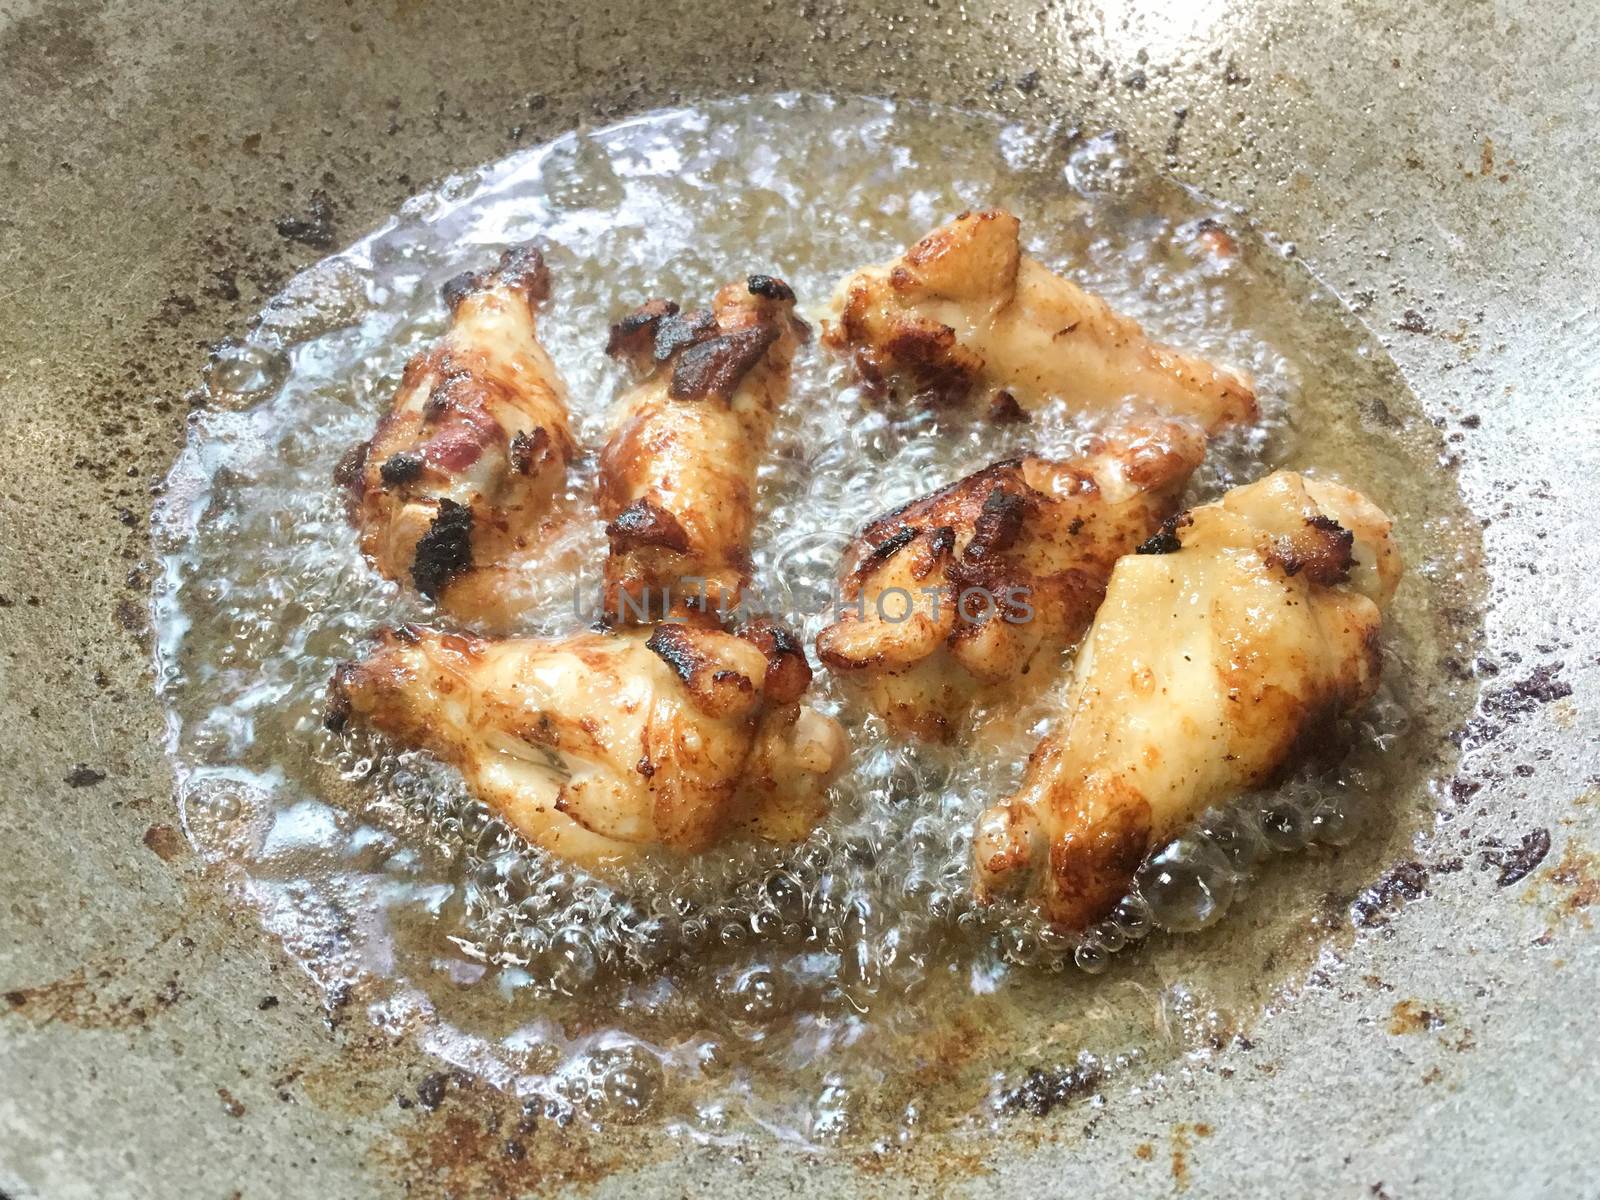 Legs of chickens in hot oil by e22xua